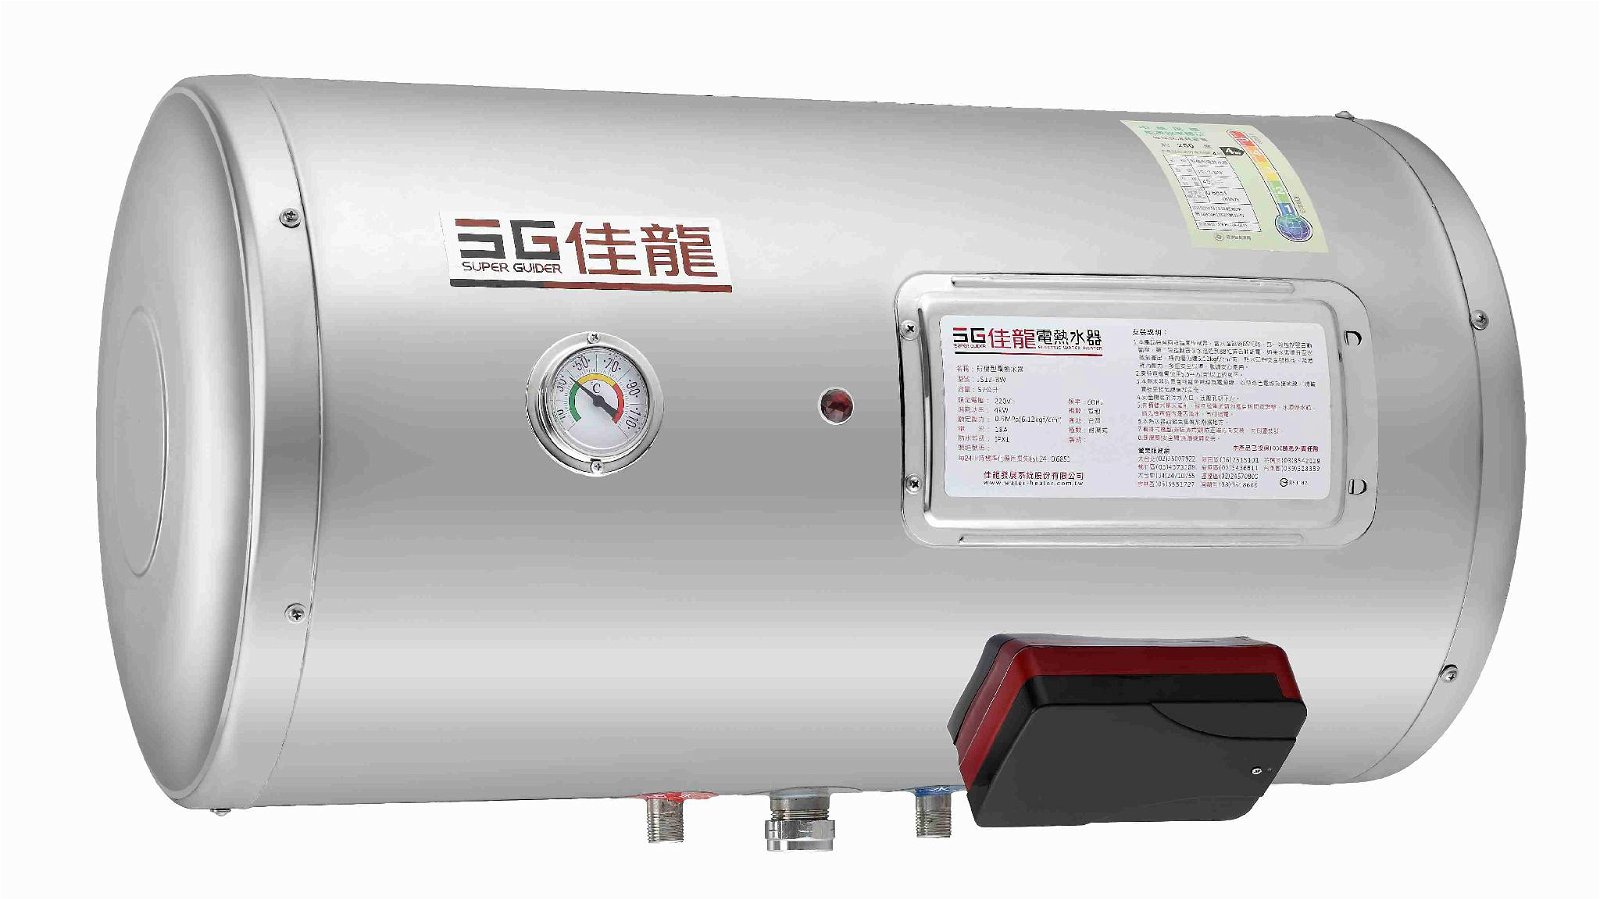 Super Guider Electric Water Heater Horizontal-Wall Series JS15-BW